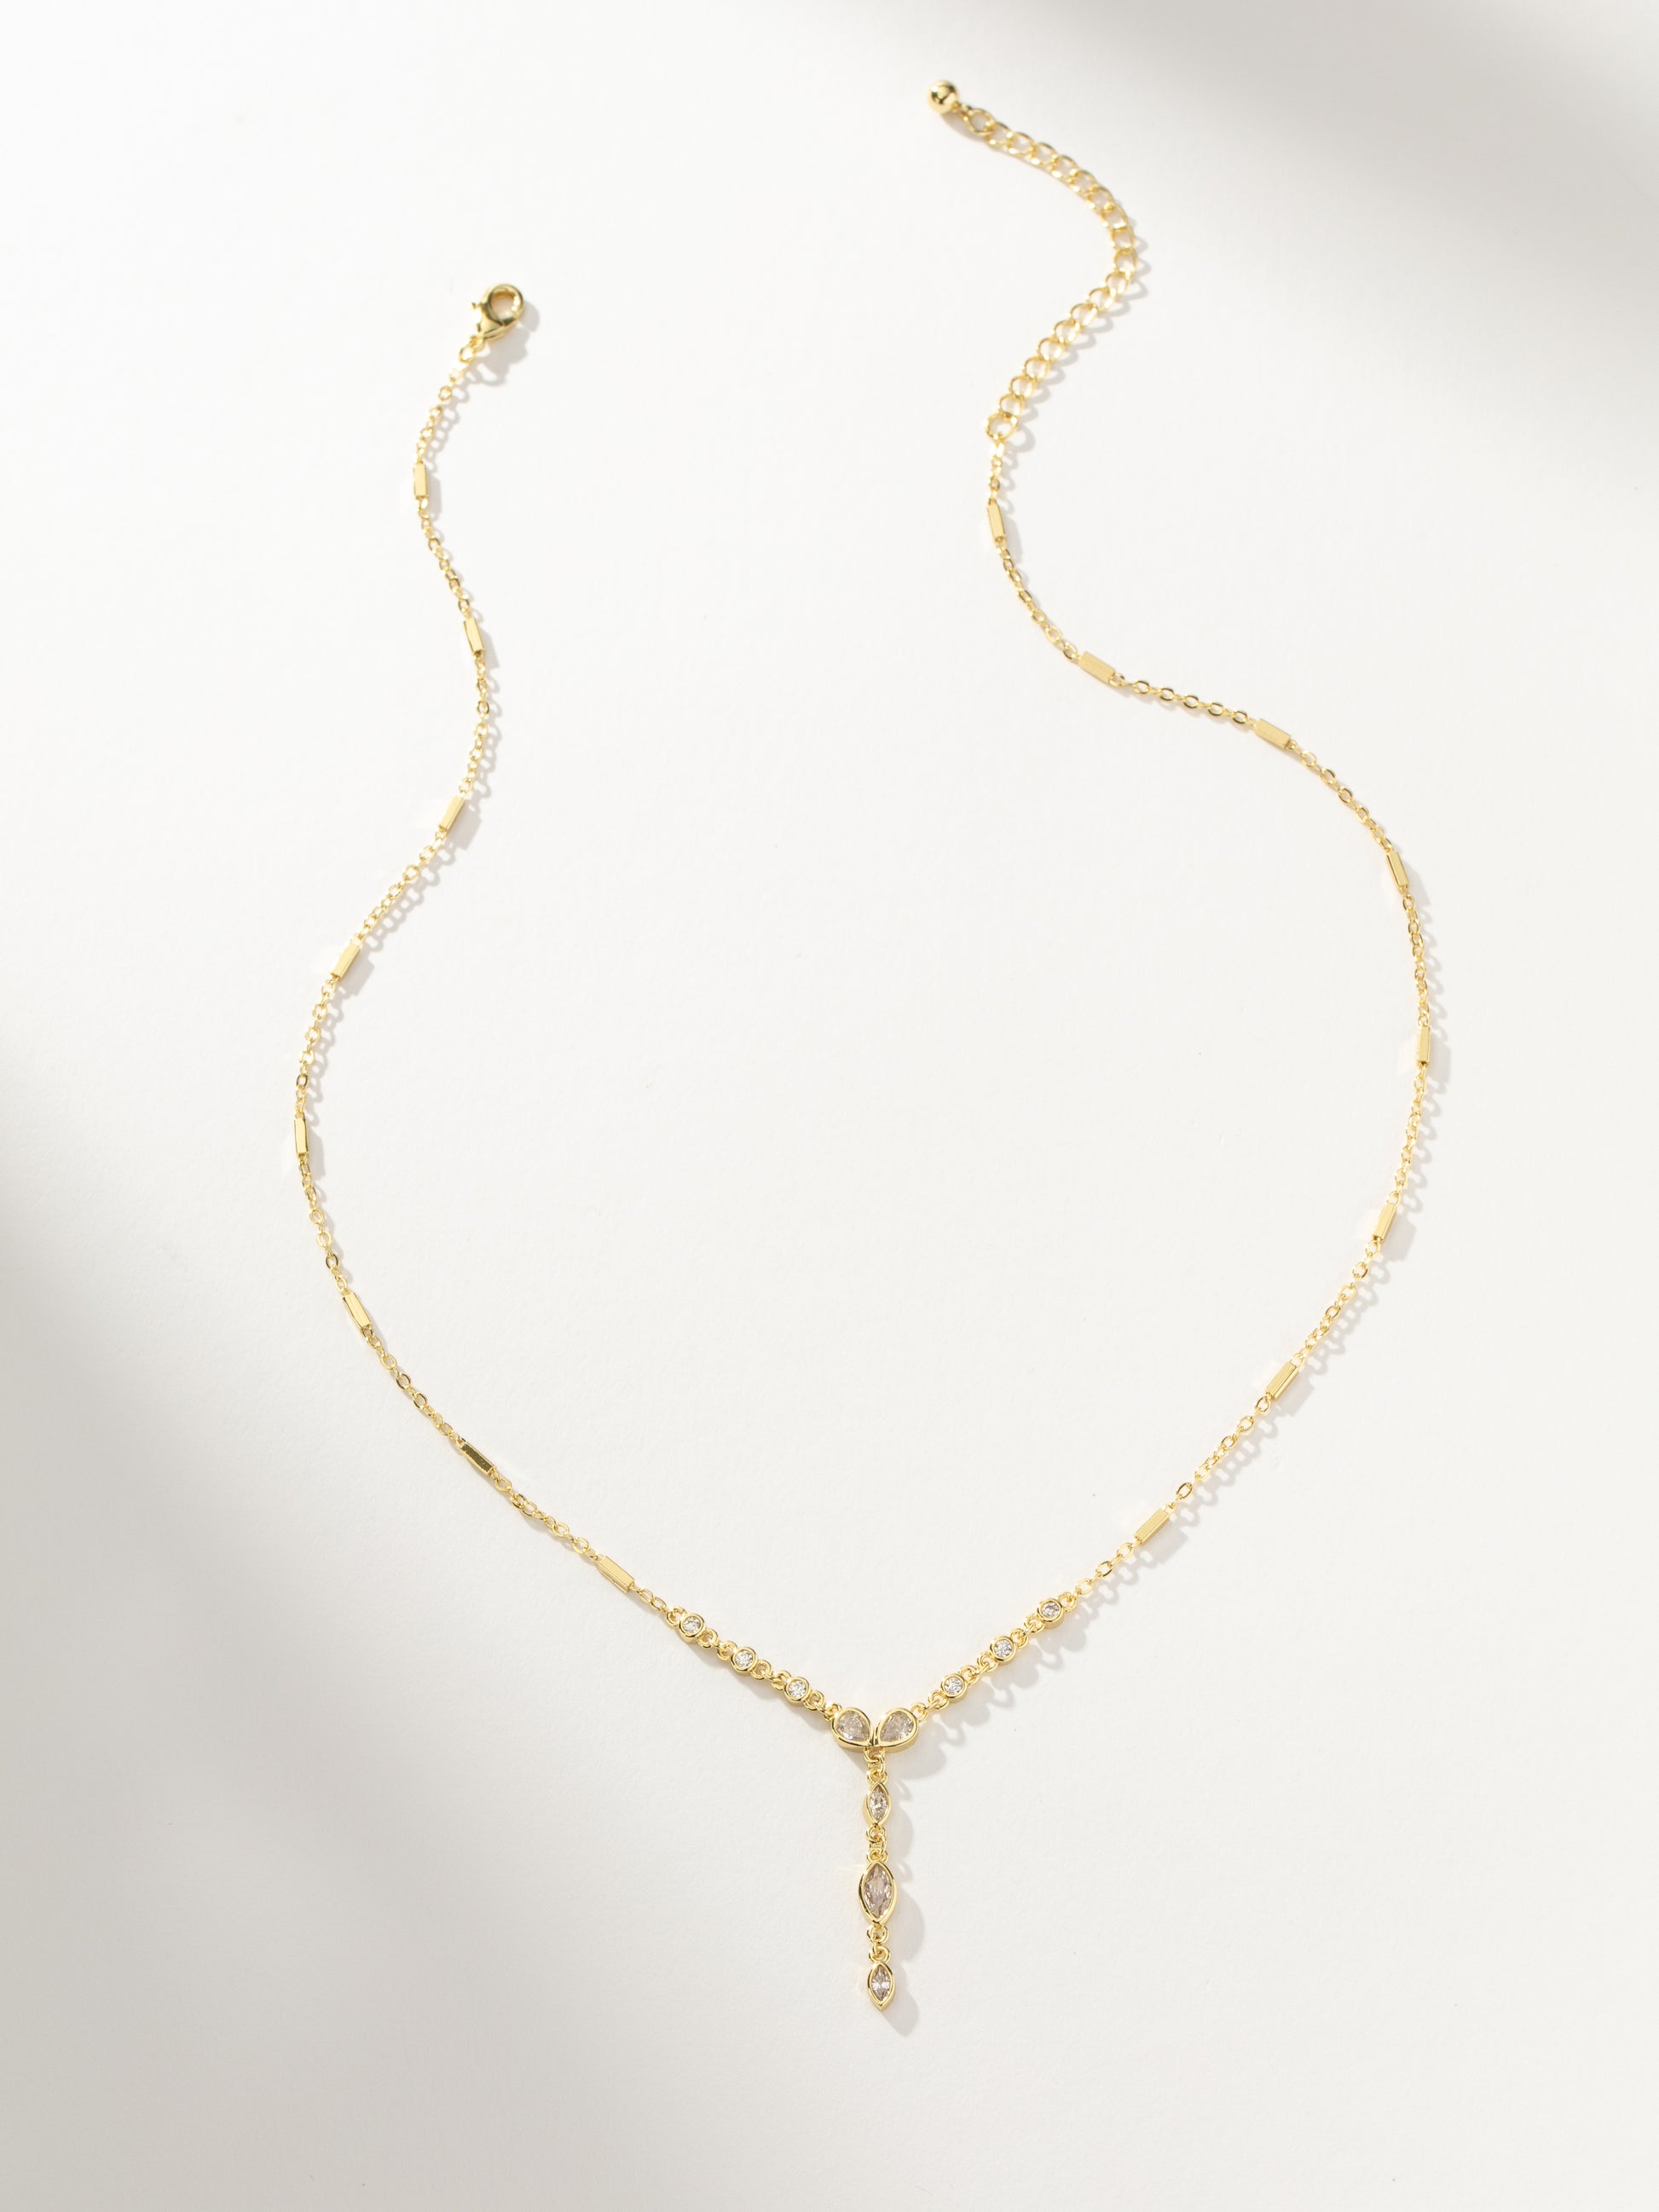 Drama Queen Necklace | Gold | Product Image | Uncommon James